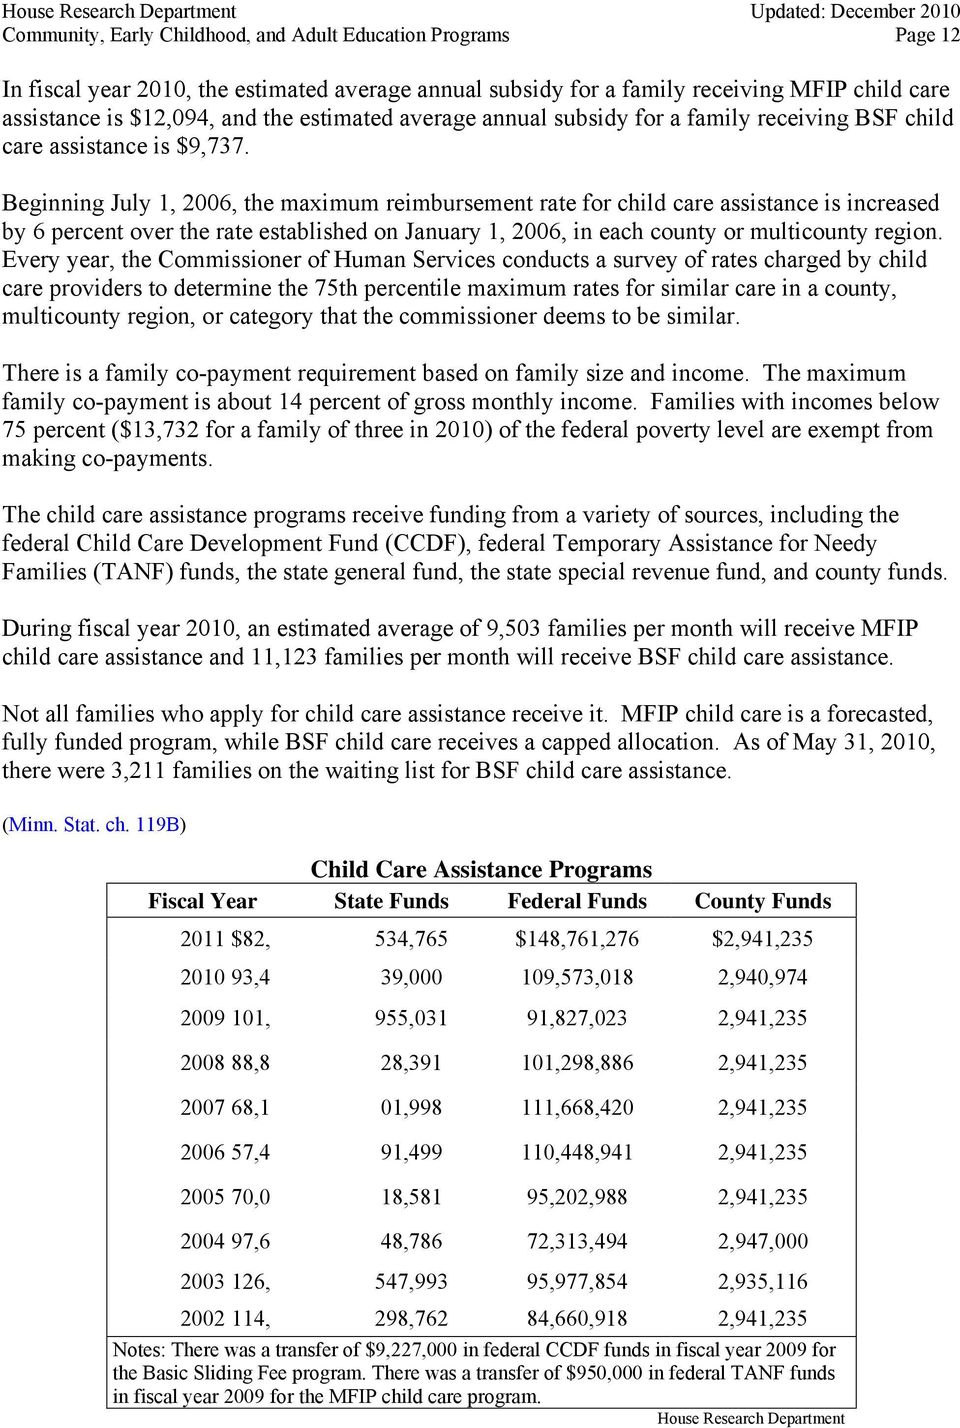 Beginning July 1, 2006, the maximum reimbursement rate for child care assistance is increased by 6 percent over the rate established on January 1, 2006, in each county or multicounty region.